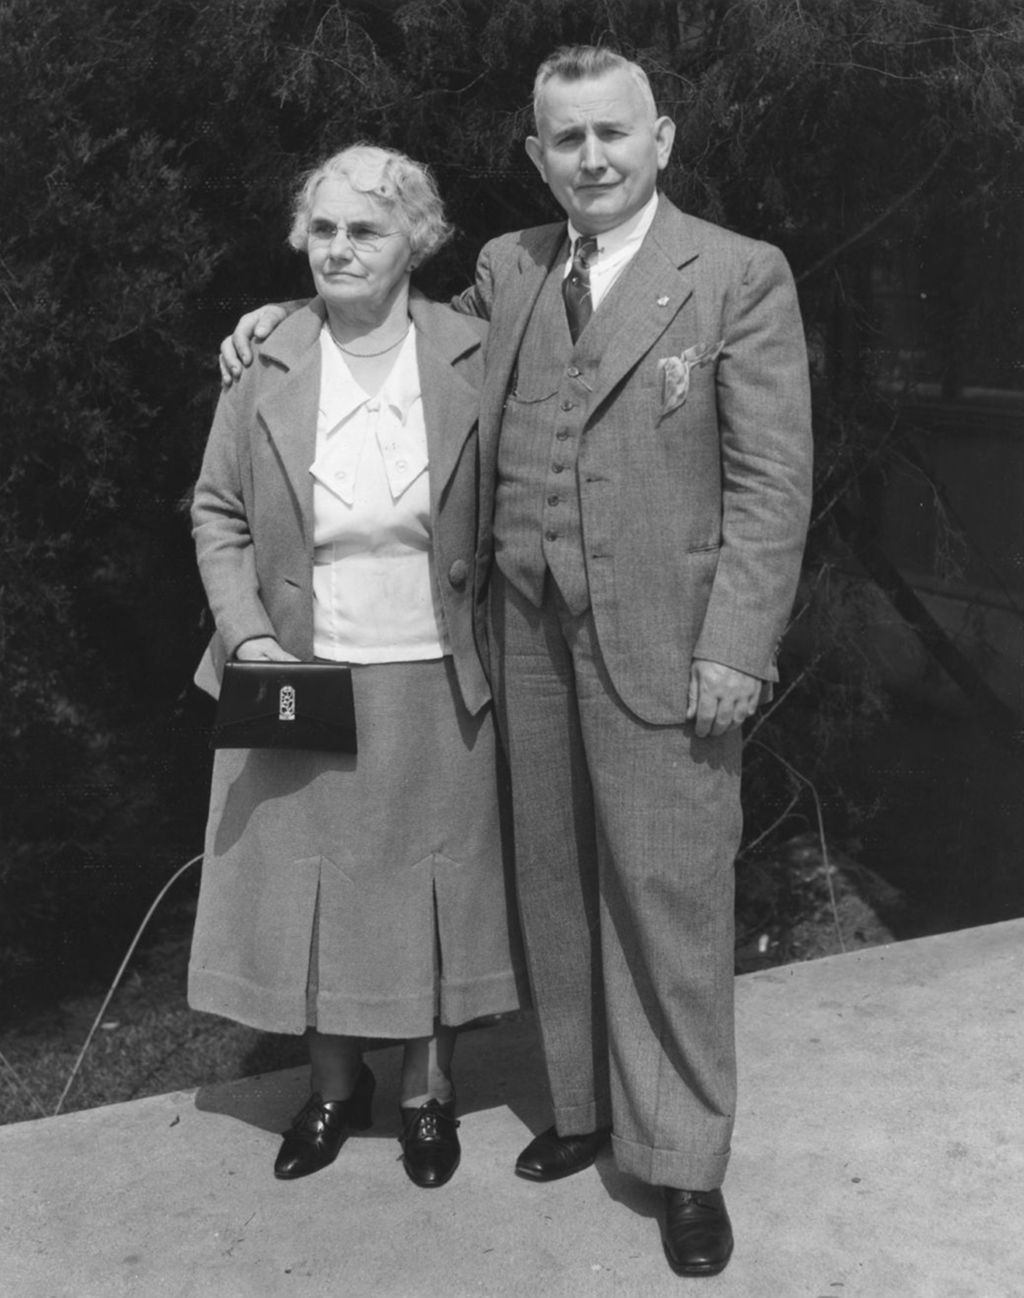 Brother and sister reunite at the Chicago World's Fair